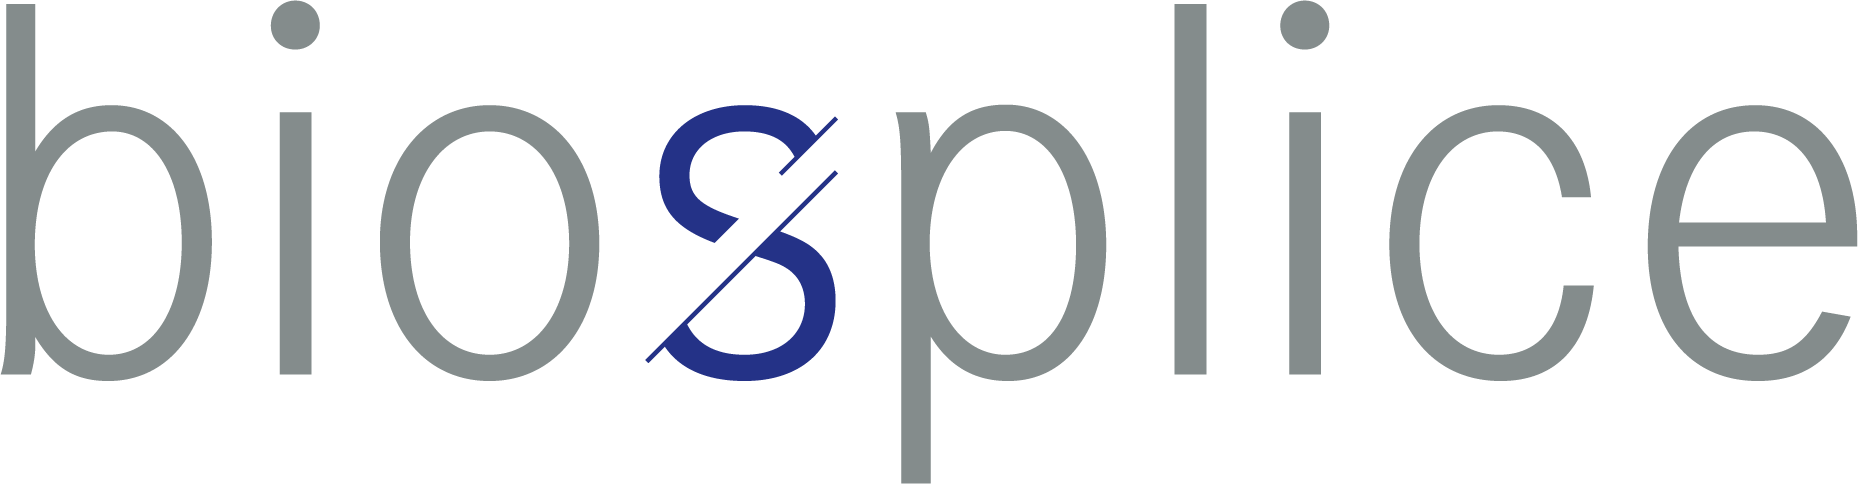 Biosplice Announces Data from Recent Clinical Trials in Knee Osteoarthritis and the Initiation of a New Phase 3 Trial